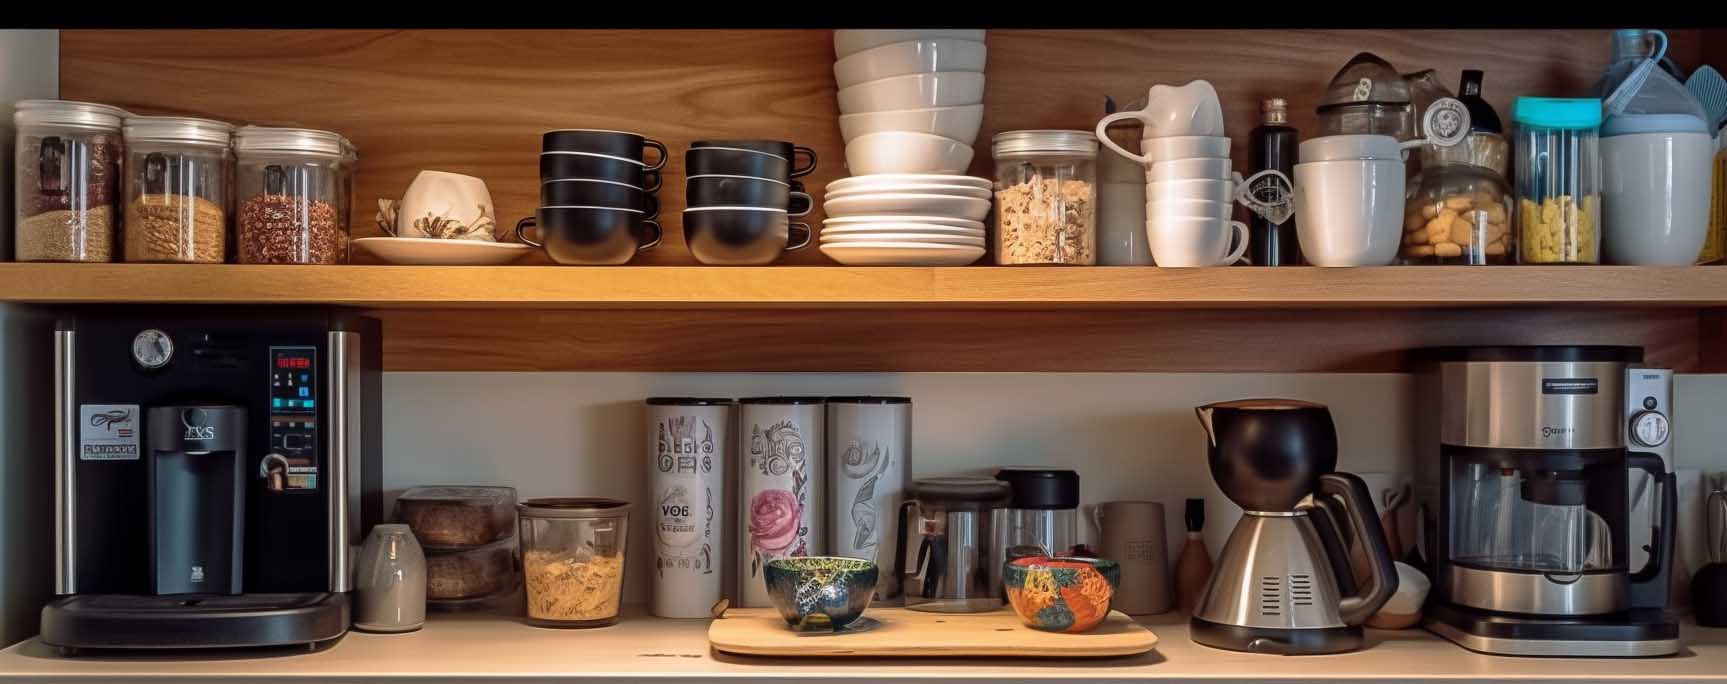 A deep shelf pantry with a dedicated section for small appliances